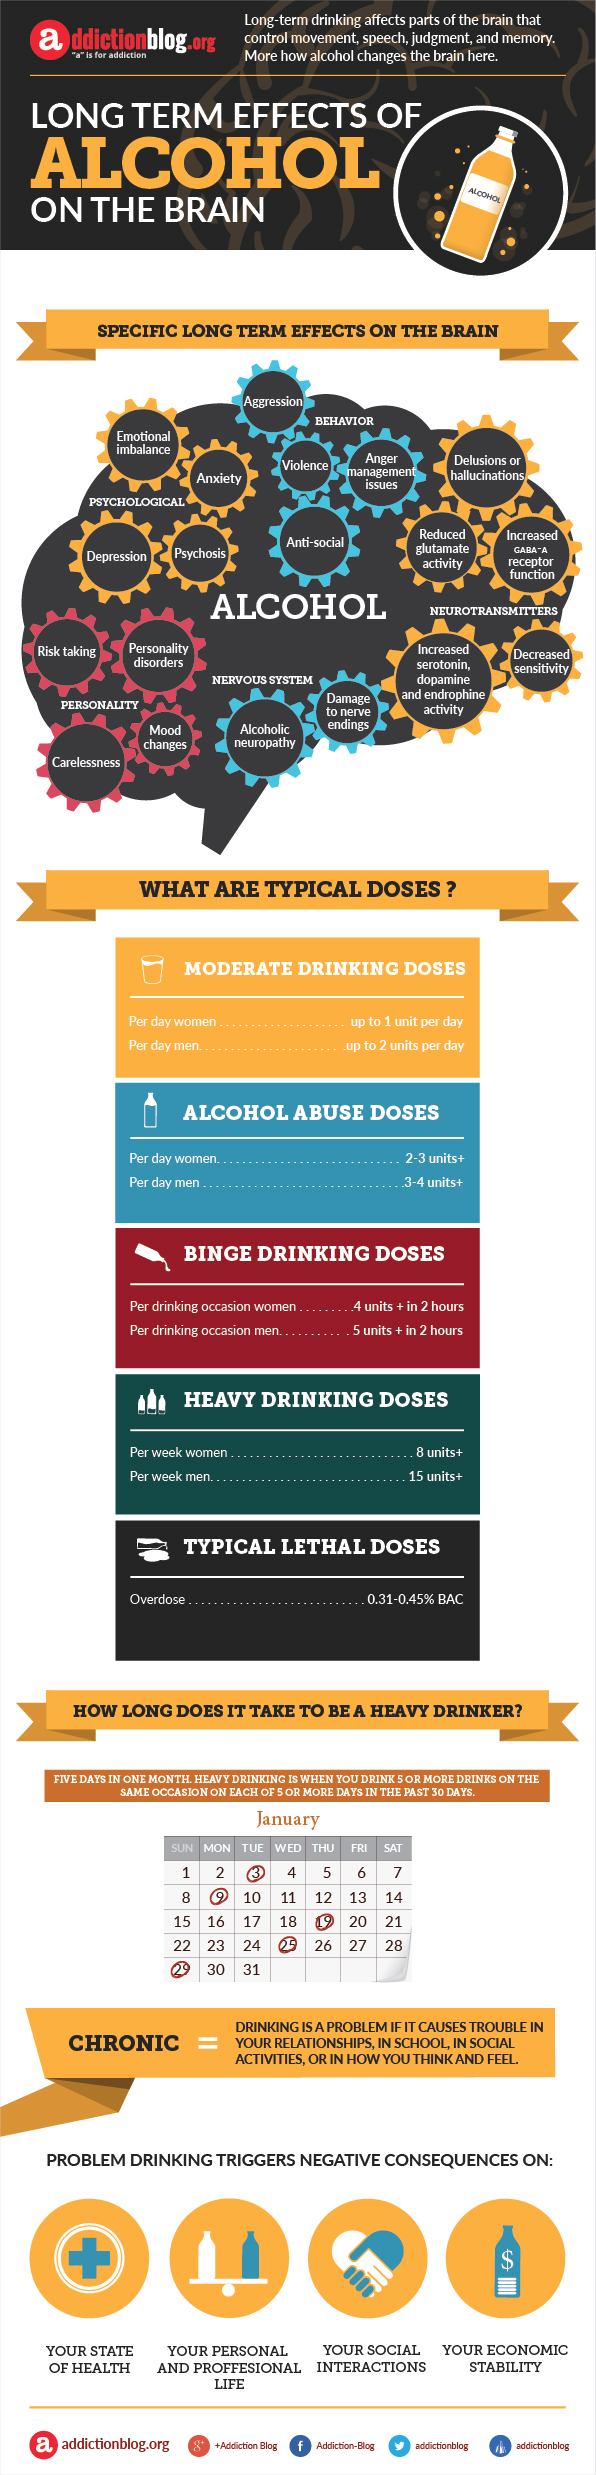 behavioral effects of alcohol